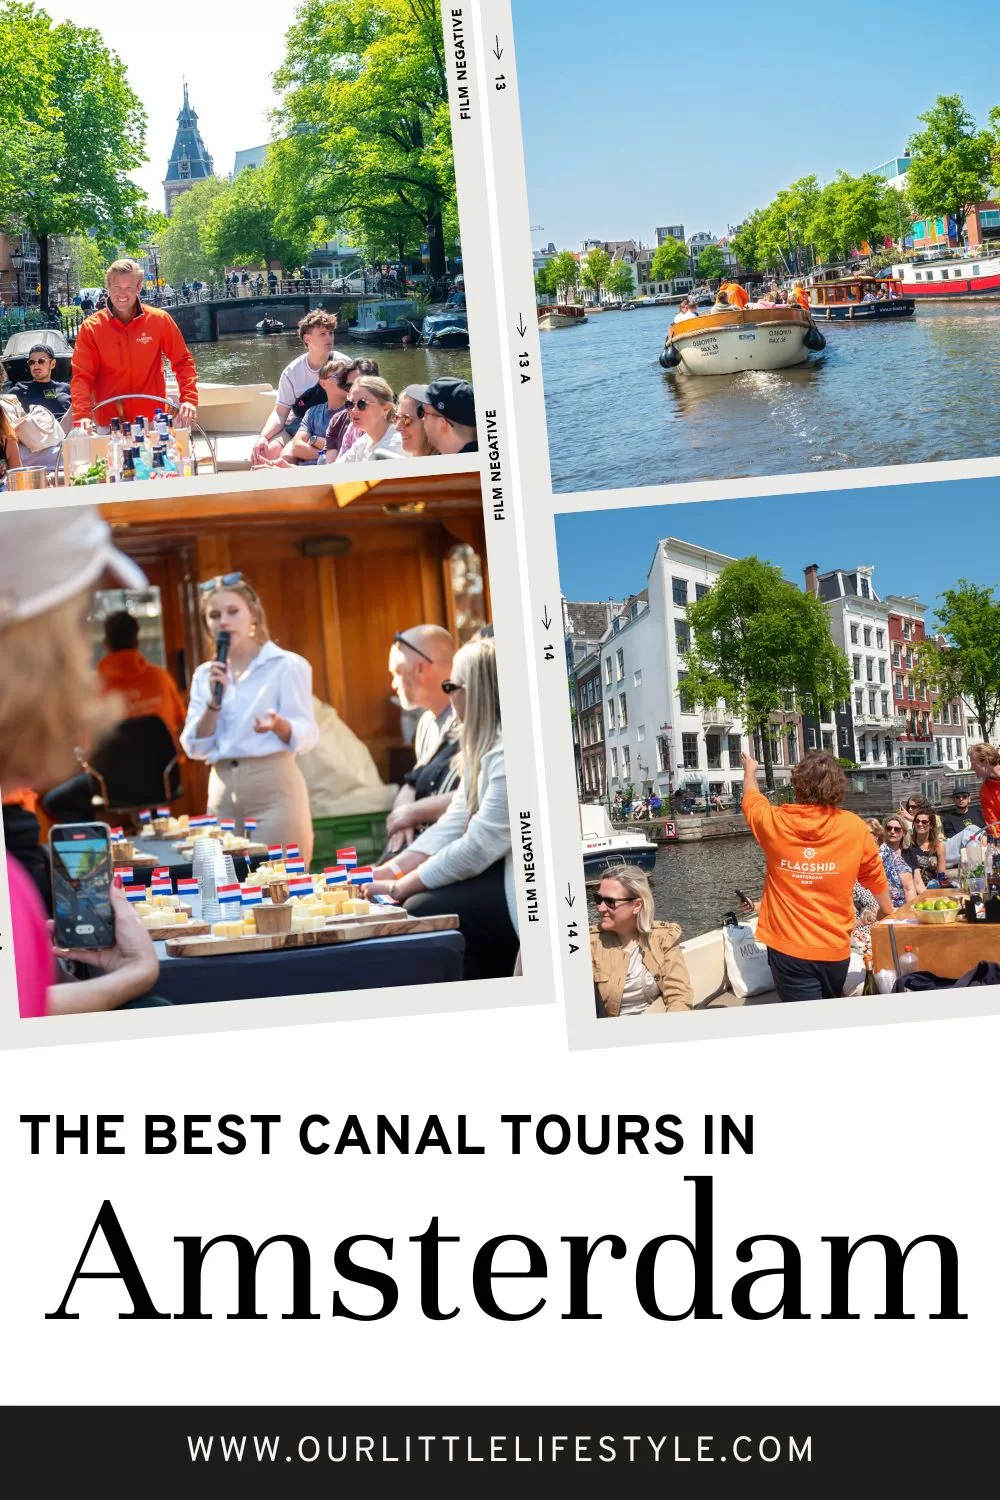 Flagship Canal Tours Amsterdam